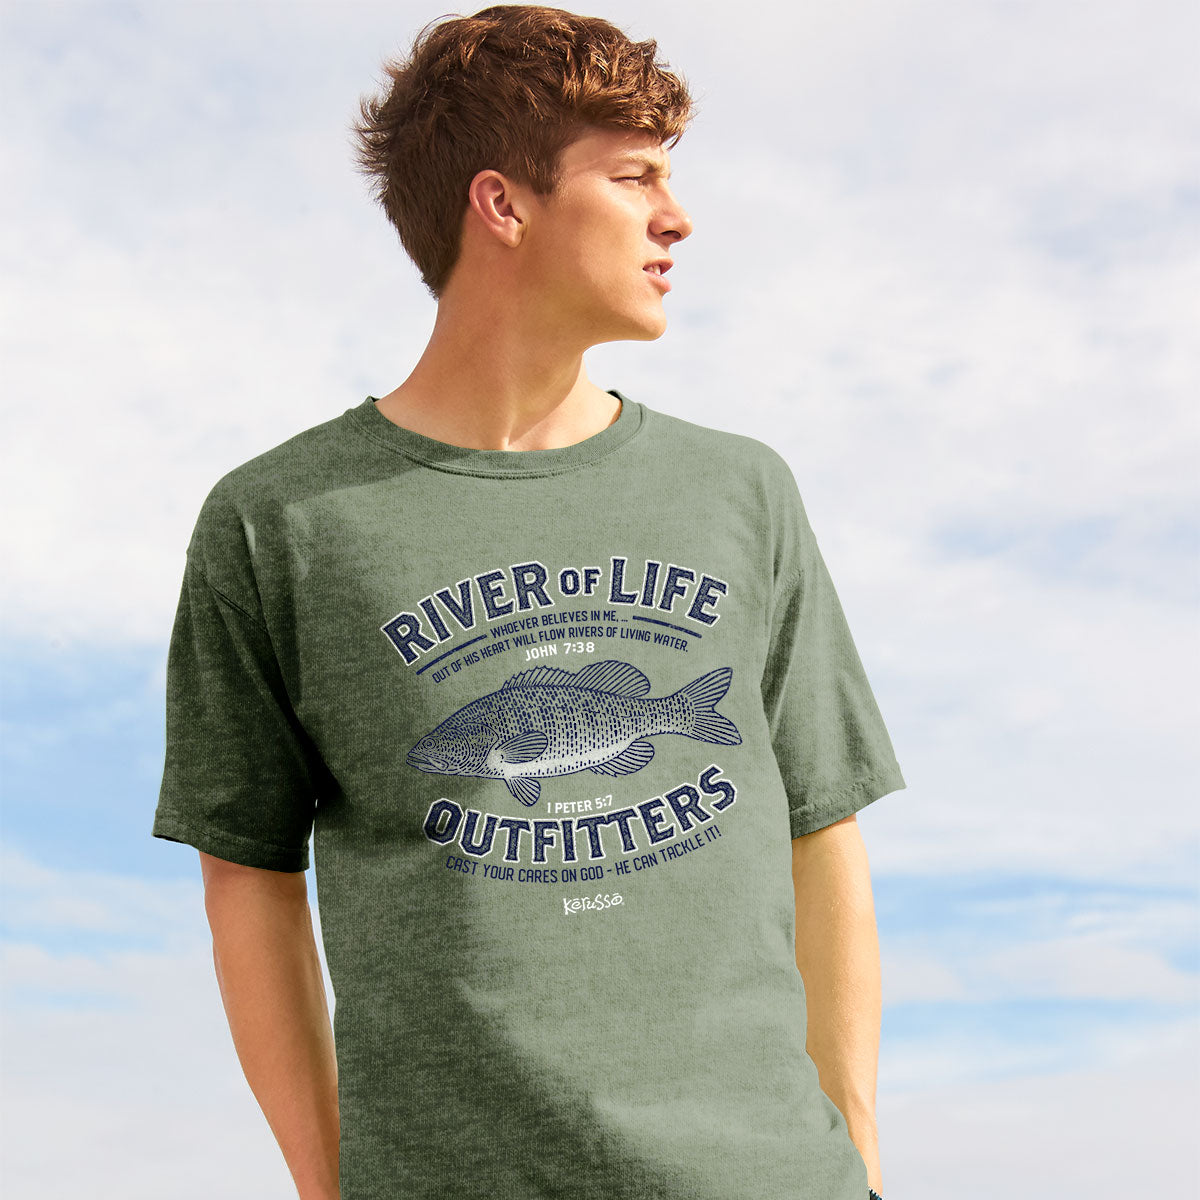 Kerusso Christian T-Shirt Fishing River Small / Heather Military